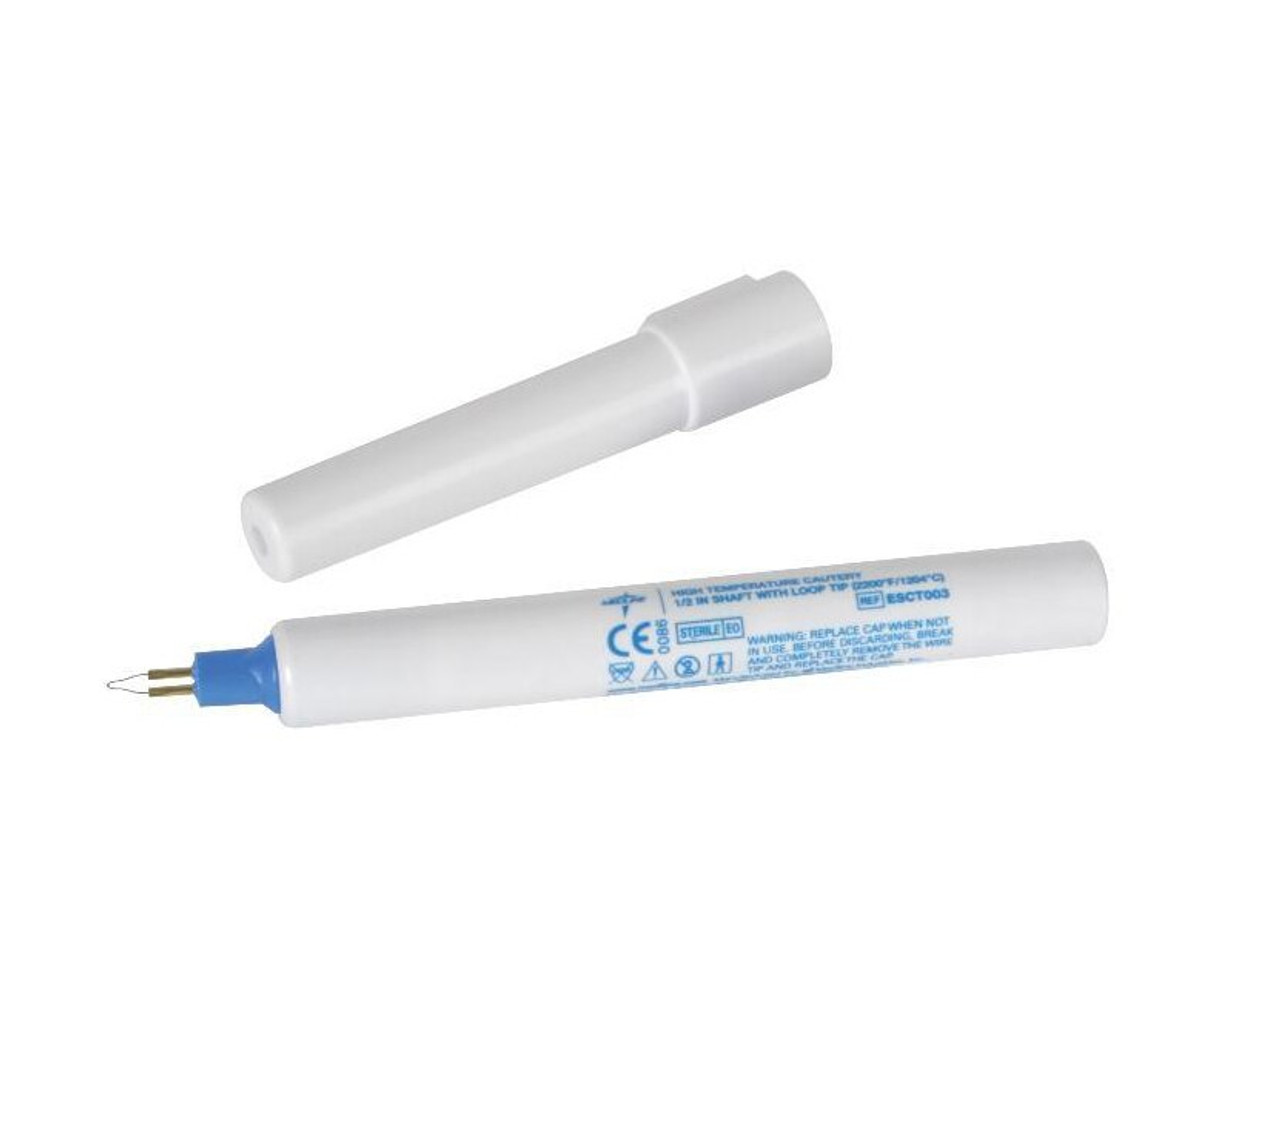 4pcs Tips for Electric Cautery Pen Condenser Pen Head Brushed